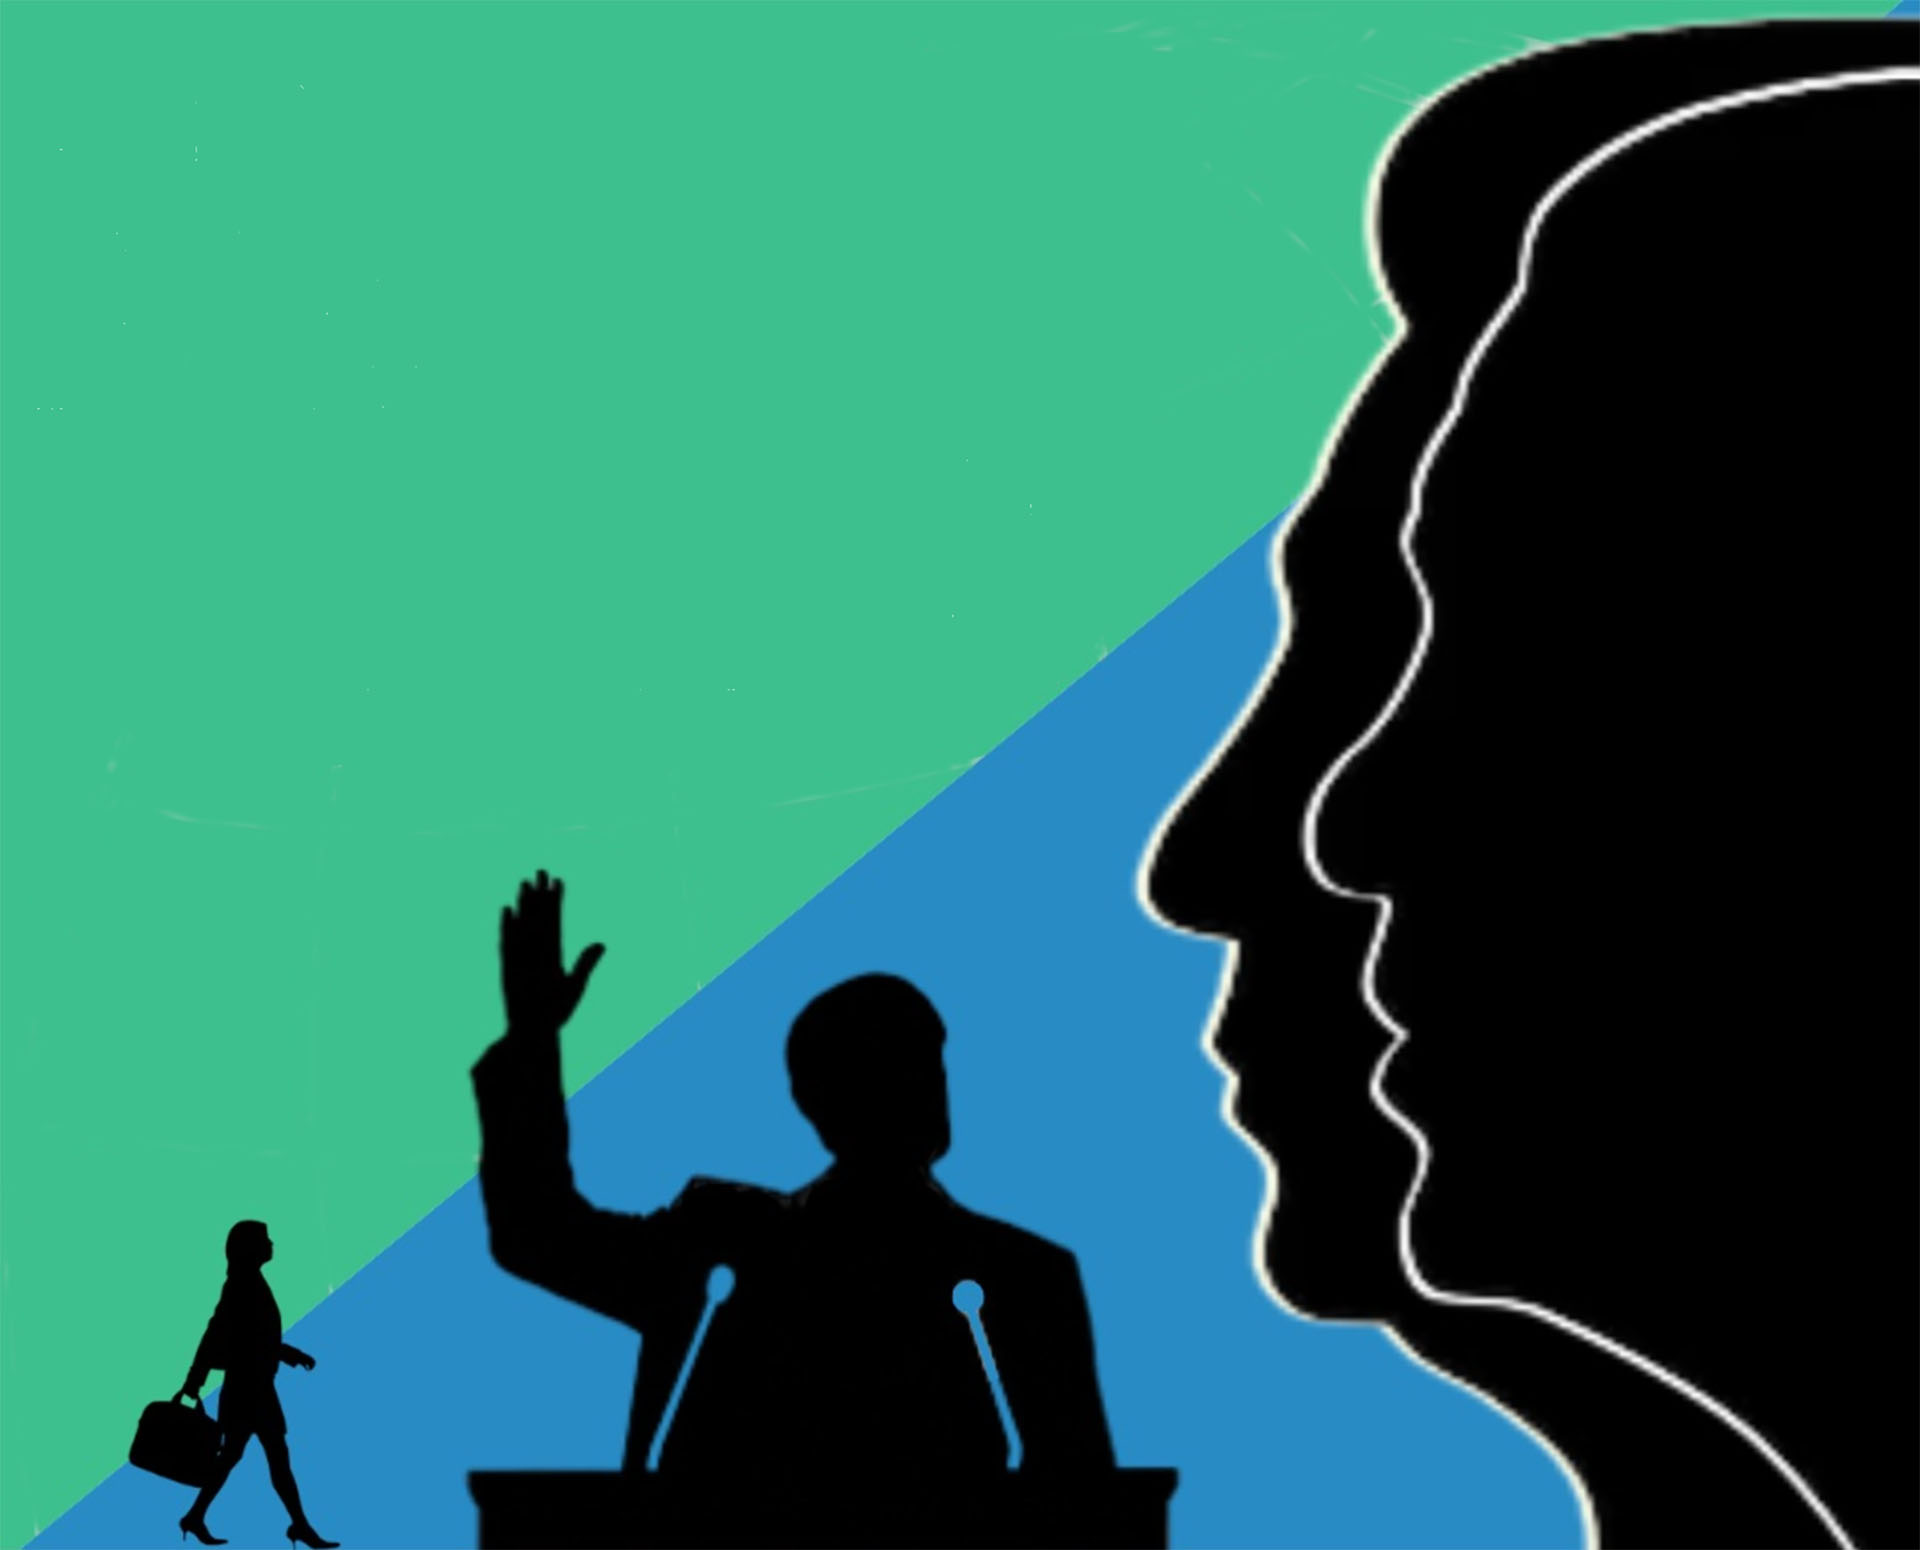 A graphical representation of a democratic society. Black figures on a green and blue background